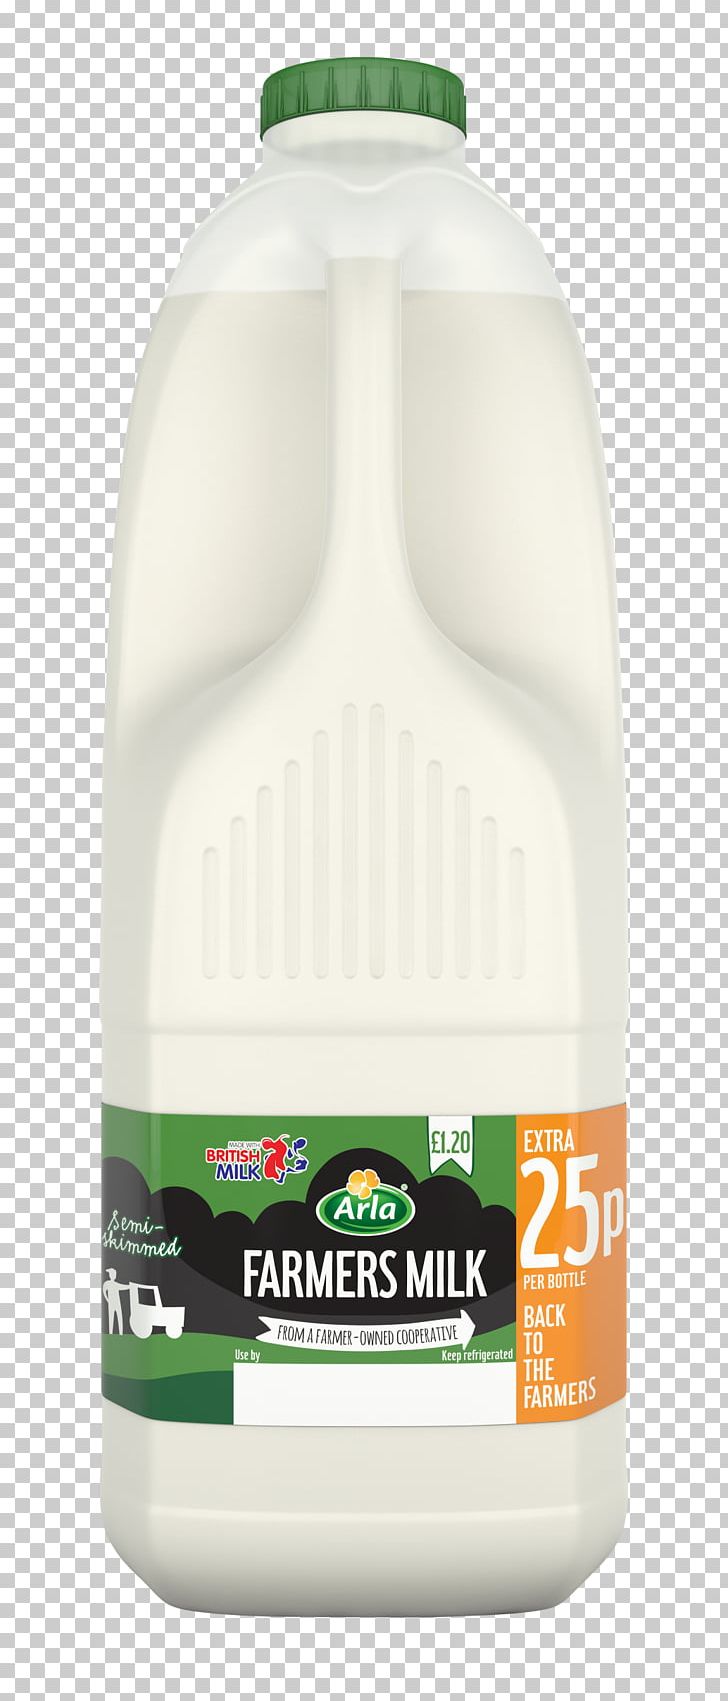 Milk Arla Foods Dairy Products Dairy Industry PNG, Clipart, Arla Foods, Cheese, Dairy, Dairy Farming, Dairy Industry Free PNG Download